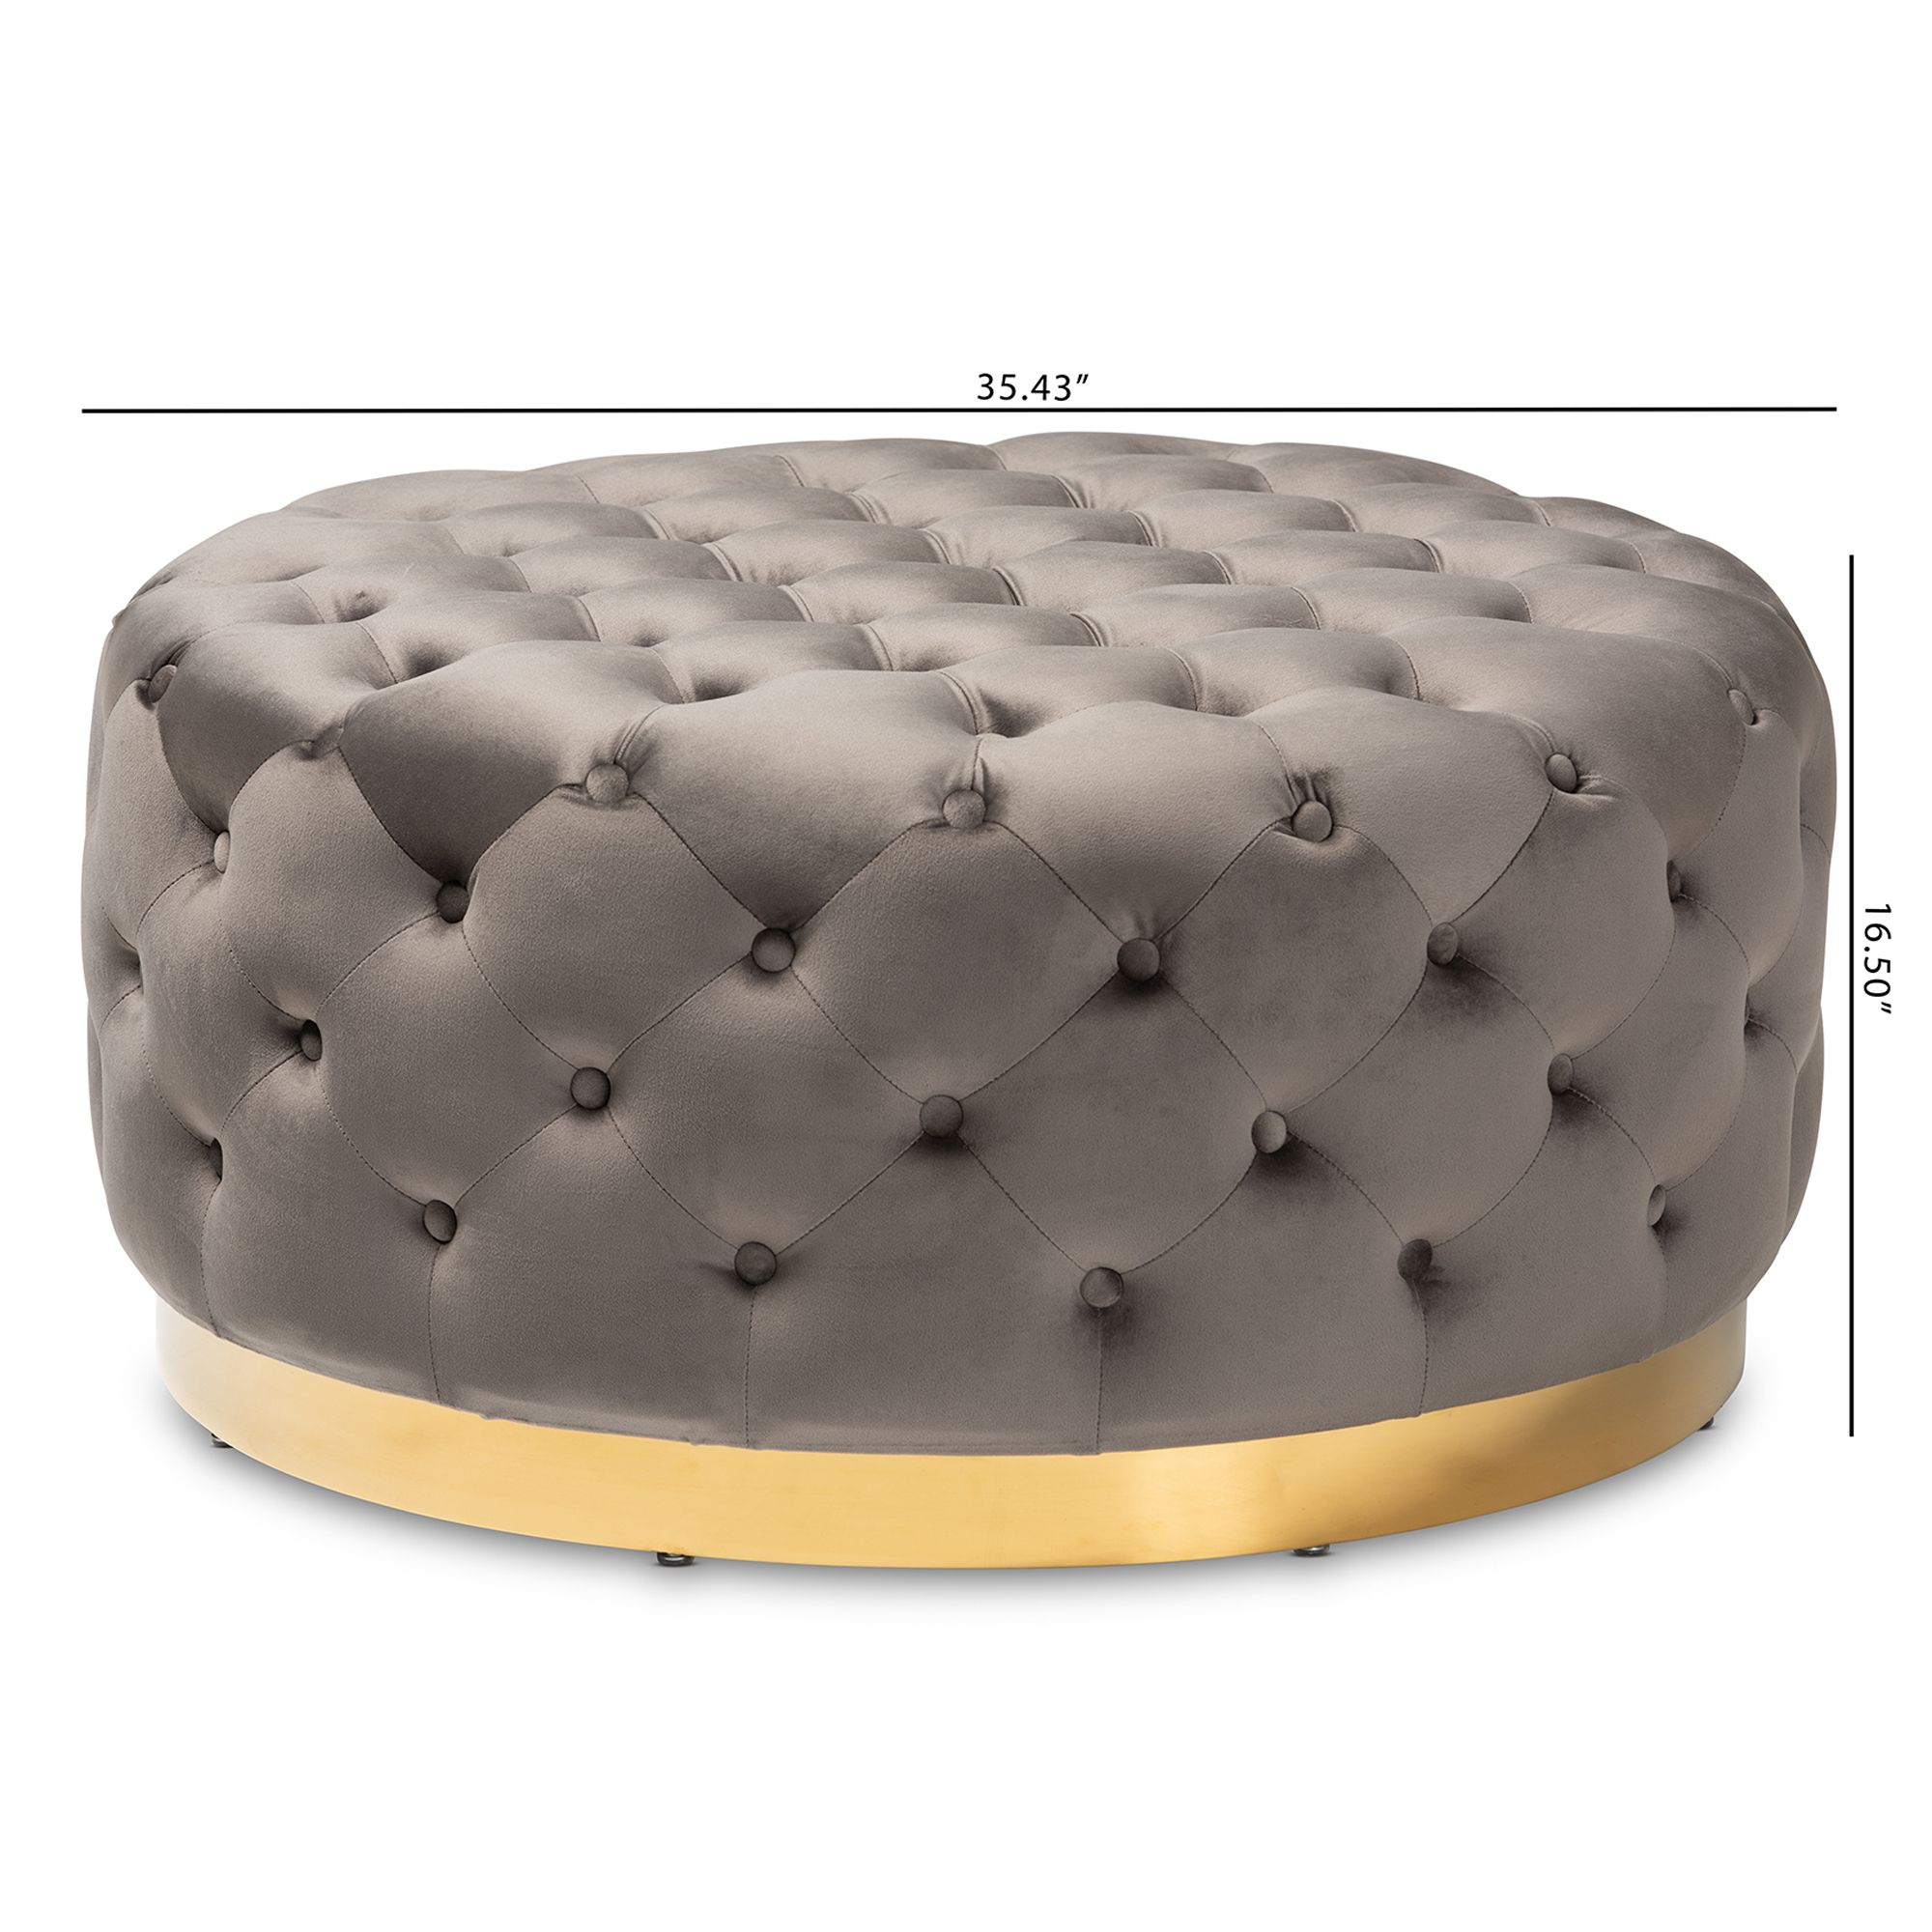 Sasha Glam & Luxe Tufted Velvet Fabric Gold Finished 35" Round Cocktail Pertaining To Fabric Tufted Round Storage Ottomans (View 19 of 20)